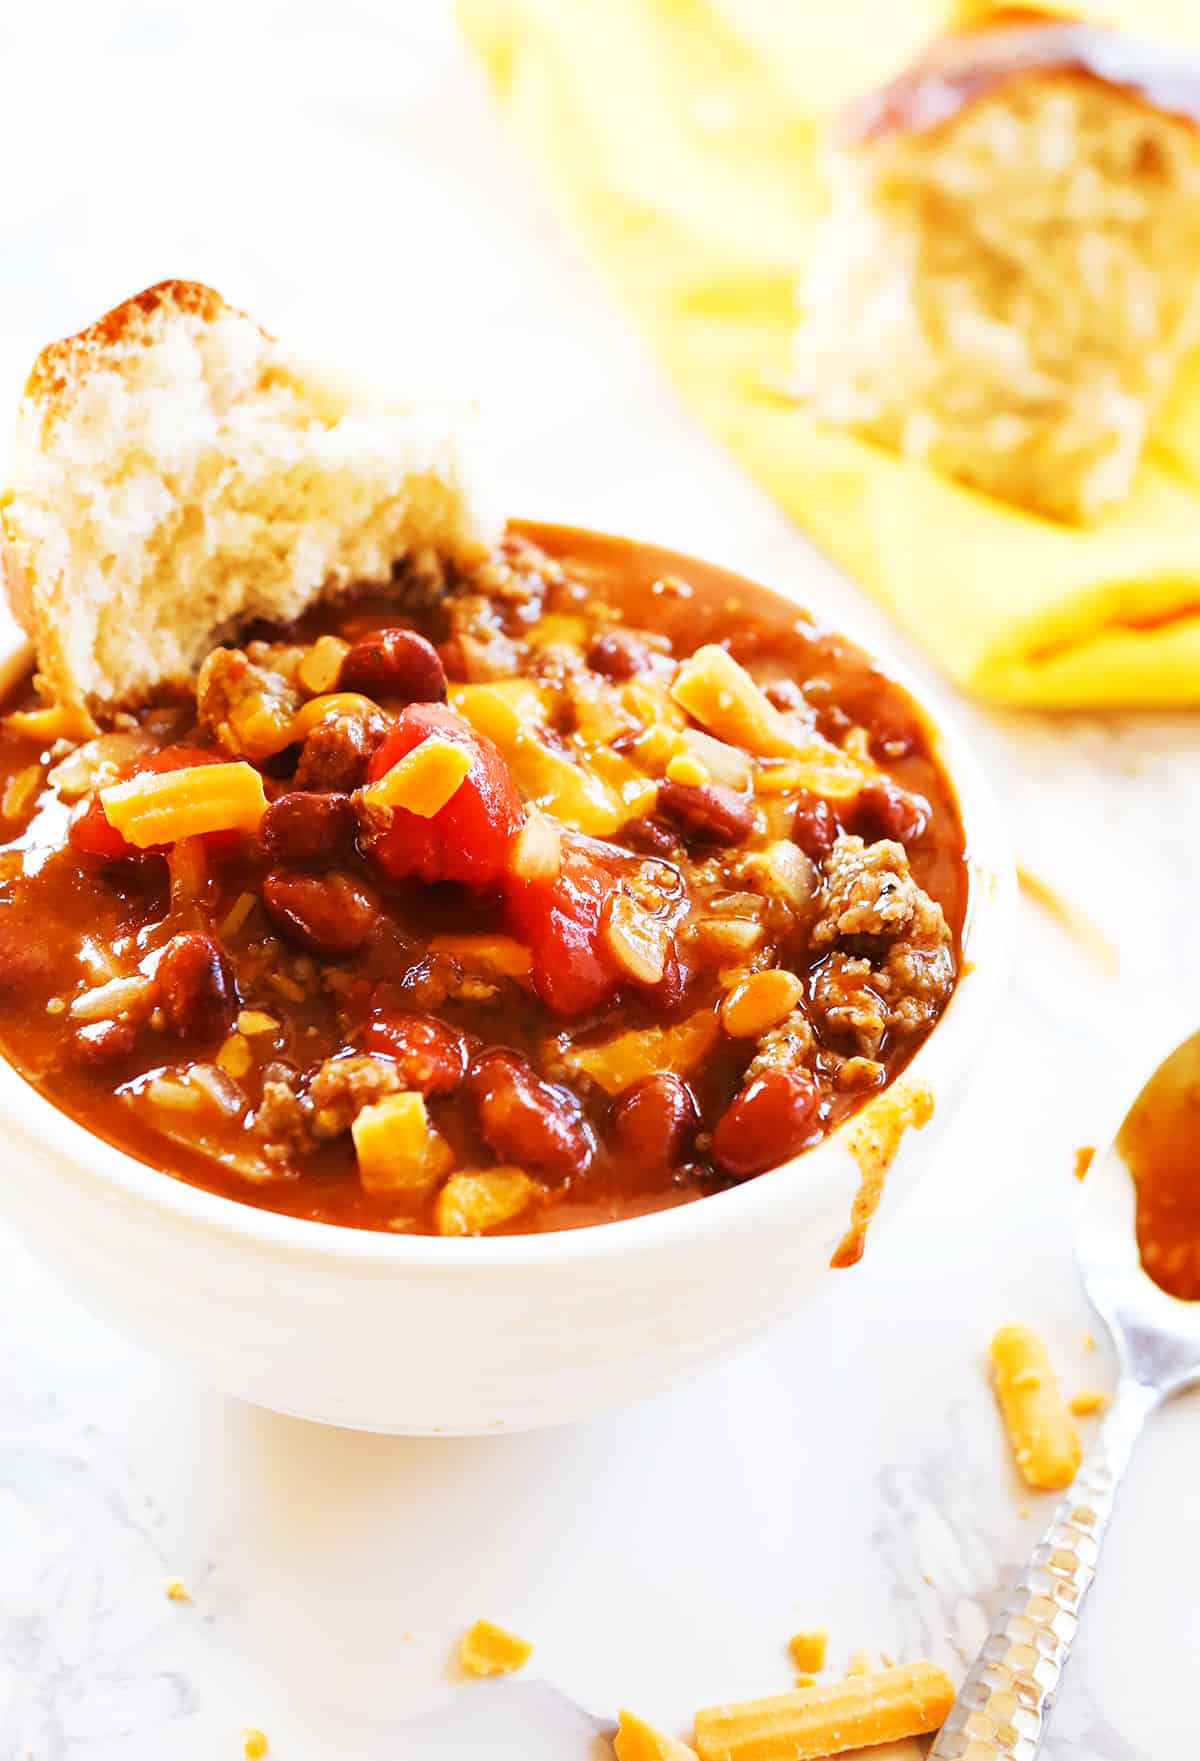 Serving of chili in a bowl with half of a bun inside.